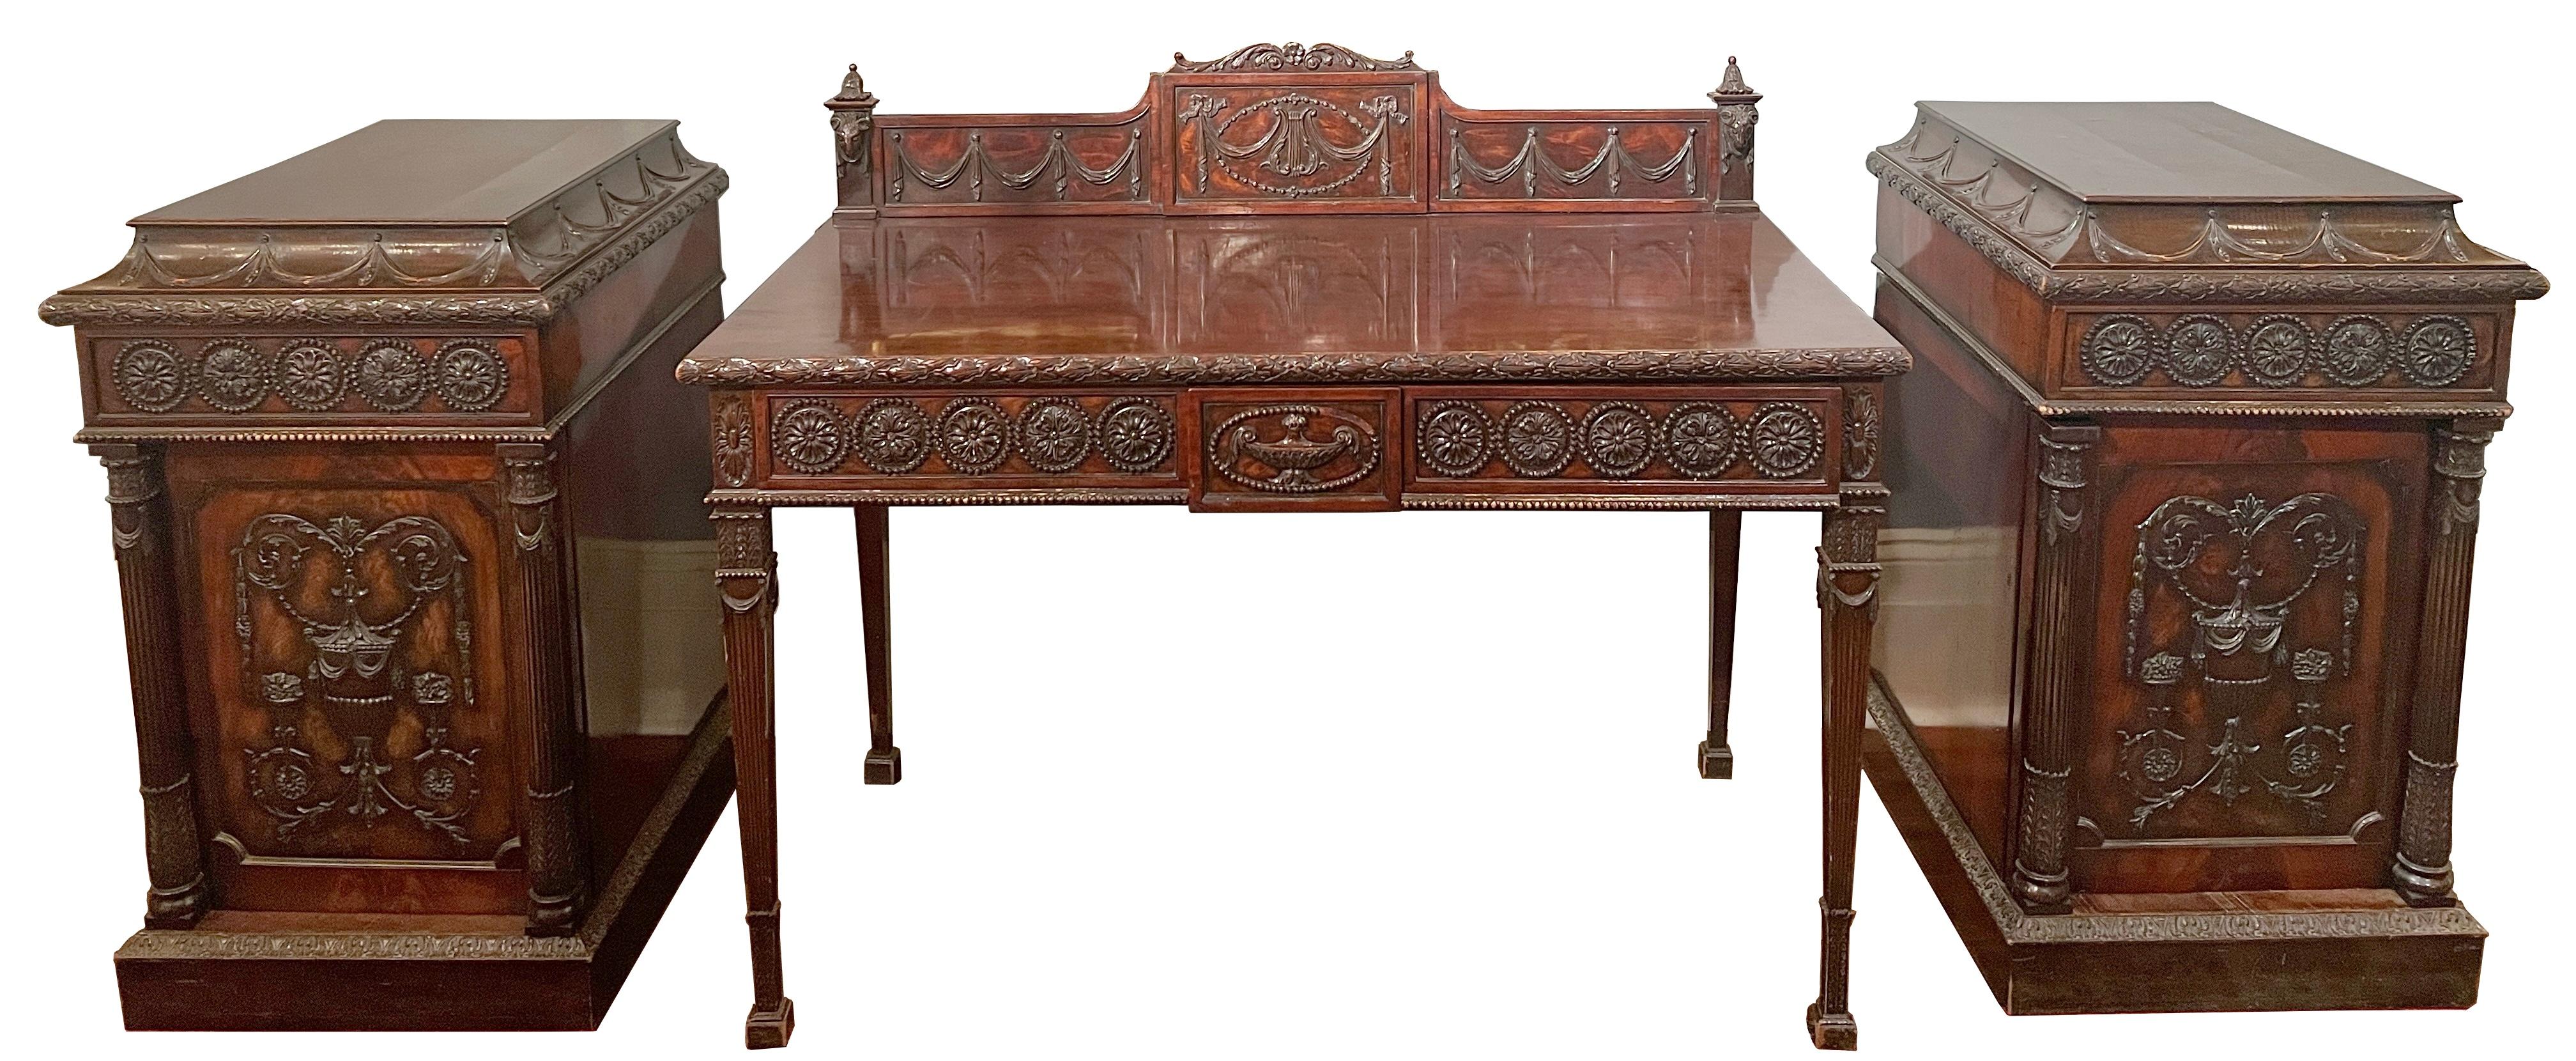 Antique English Adams Style Carved Mahogany 3 Piece Sideboard, Circa 1880. For Sale